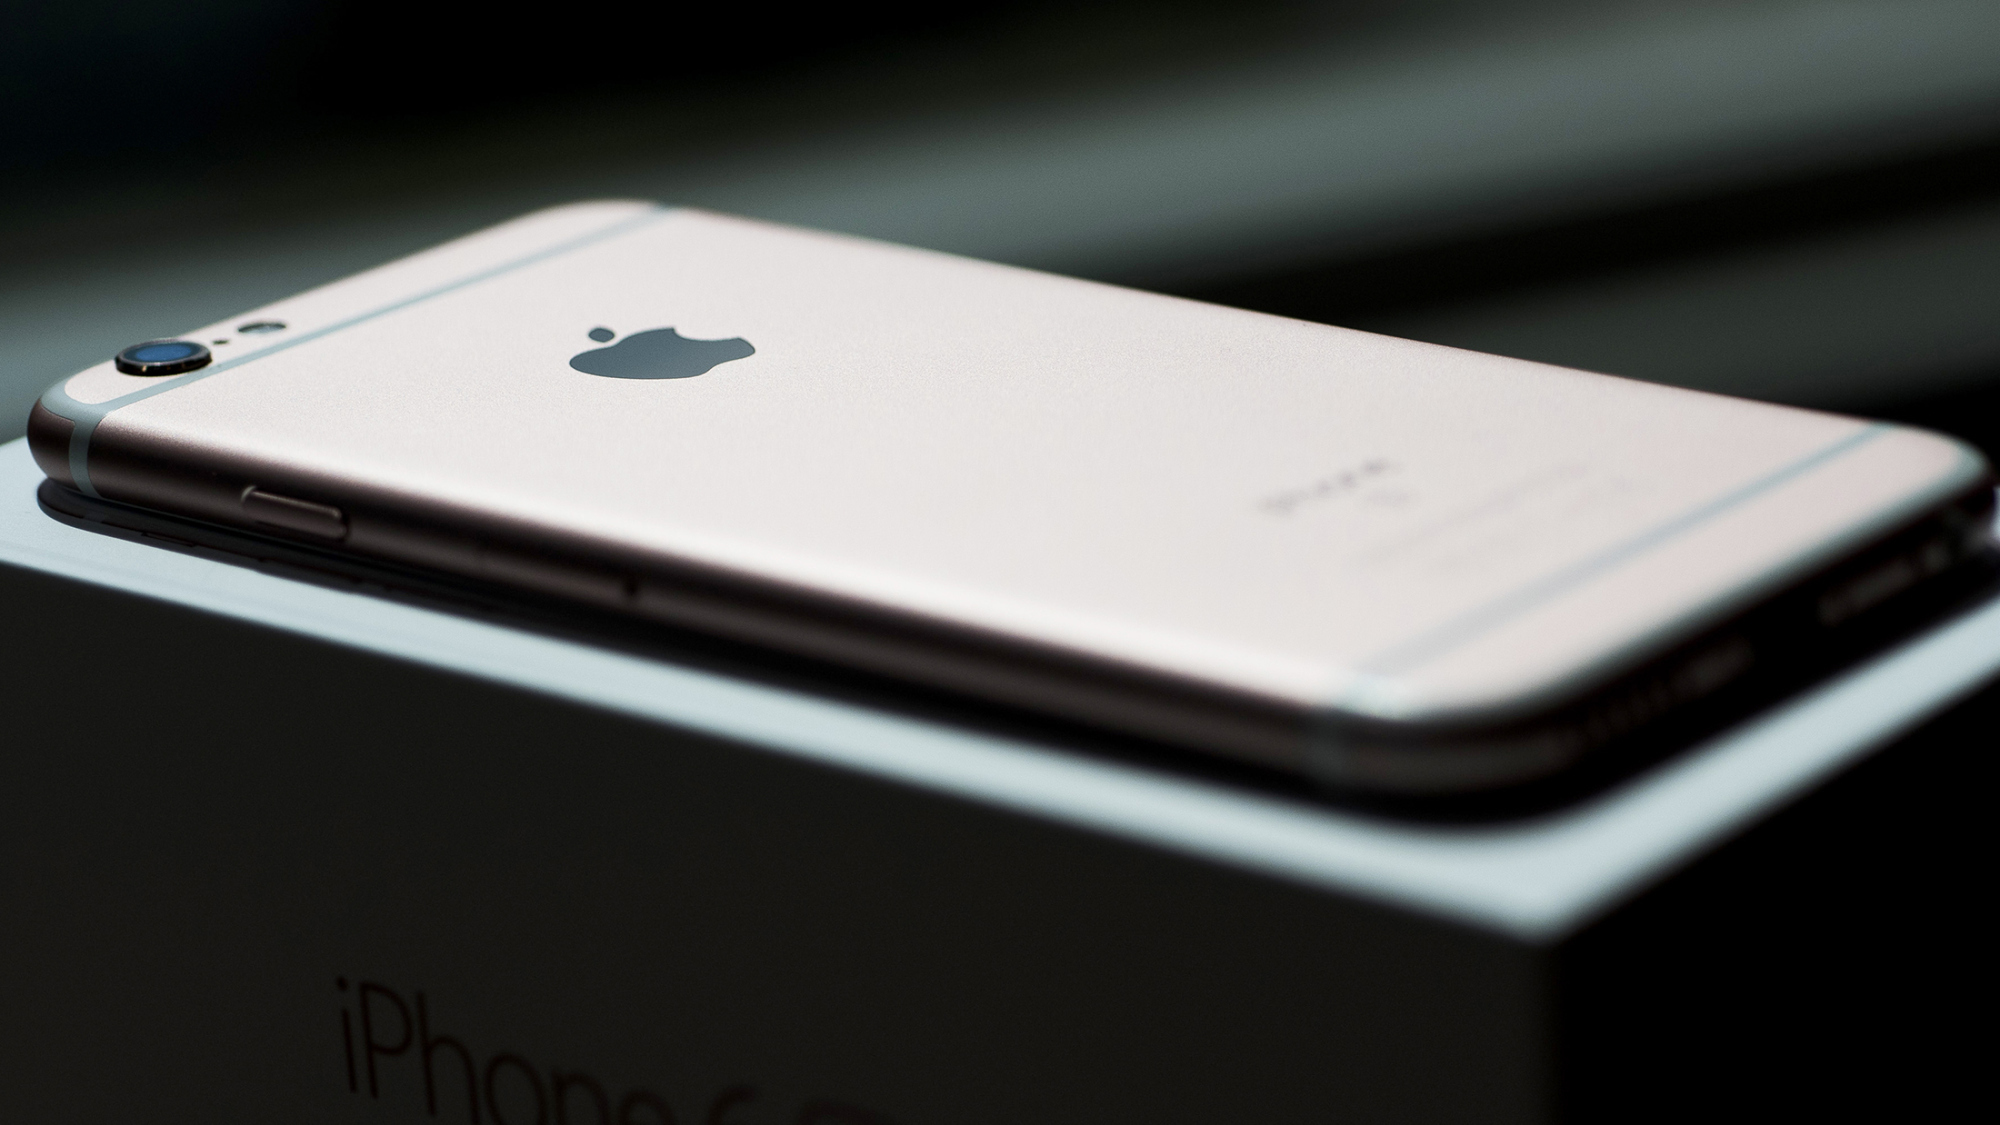 An Apple Inc. iPhone 6s smartphone sits on a packaging box in an arranged photograph.
